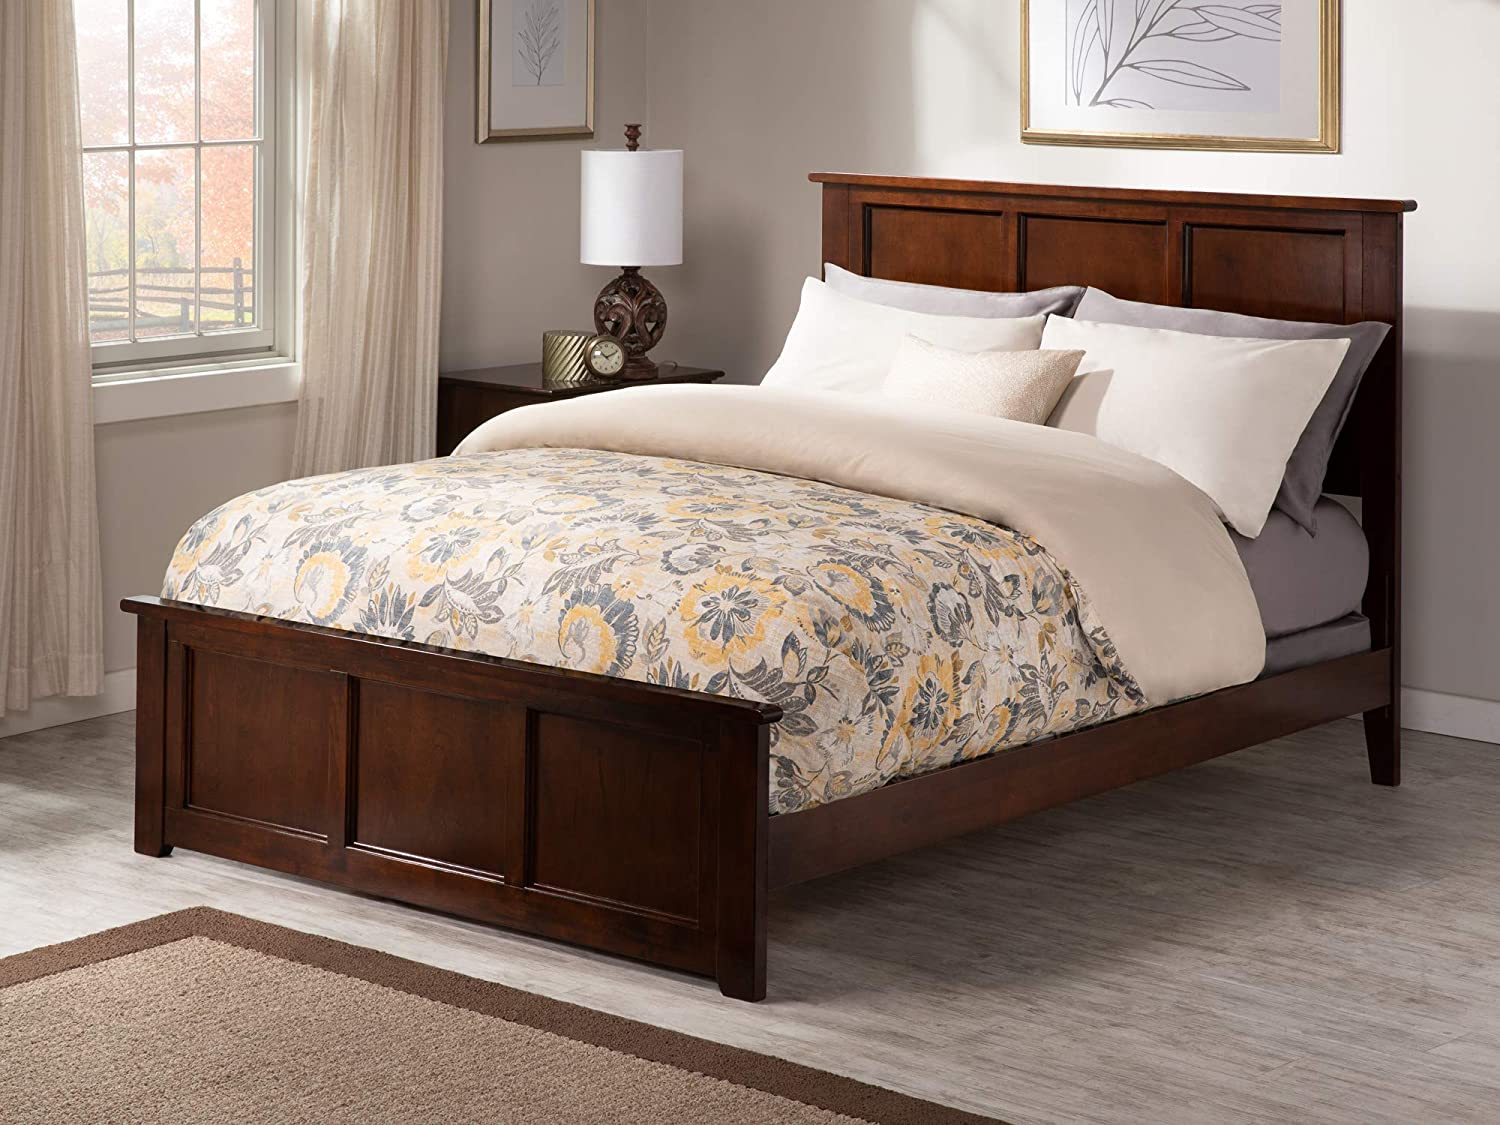 AFI Atlantic Furniture AR8636034 Madison Traditional Bed with Matching Foot Board, Full, Walnut